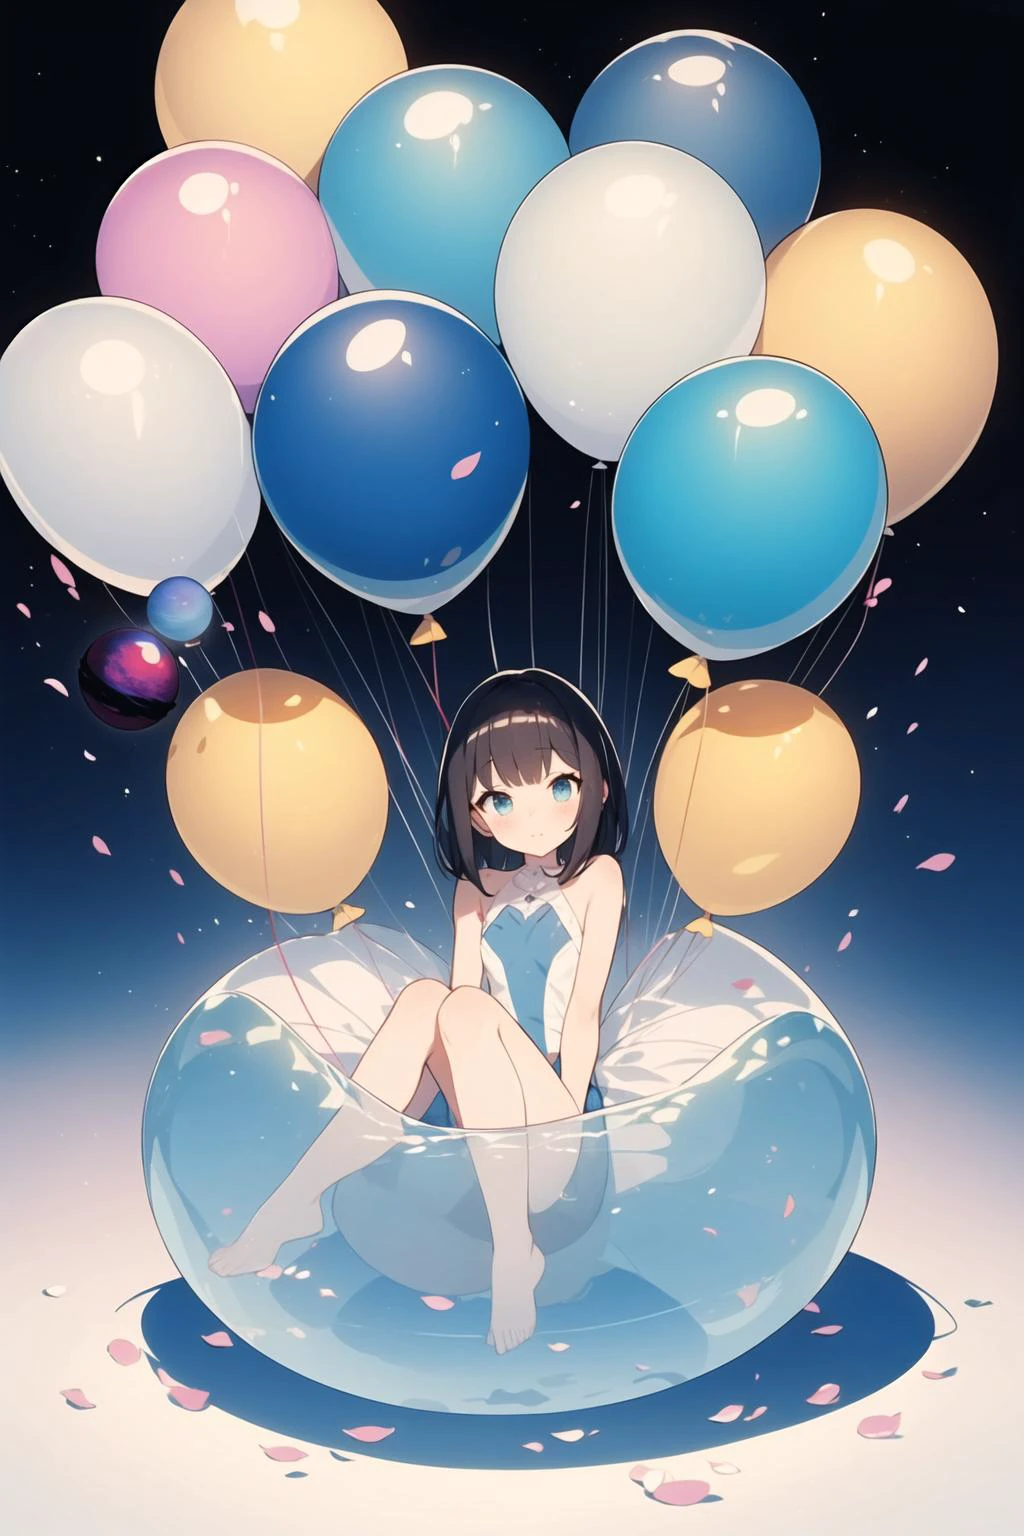 ([balloons:Small planets:0.5]:1.4), (Small_planets inside of balloons:1.4), (lots of colorful Small_planets:1.35)
(colorful planets, earth, floating petals, big balloons:1.22),
1 girl, cute face,
Full body, sitting, detailed beautiful eyes, bare legs, costume combination, Goddess, perfect body, [nsfw:0.88]
(sitting on ice_planet:1.22)
(lots of [floting blue Butterflies:floting ice:0.4]:1.22)
(detailed light), (an extremely delicate and beautiful), volume light, best shadow,cinematic lighting, Depth of field, dynamic angle, Oily skin,